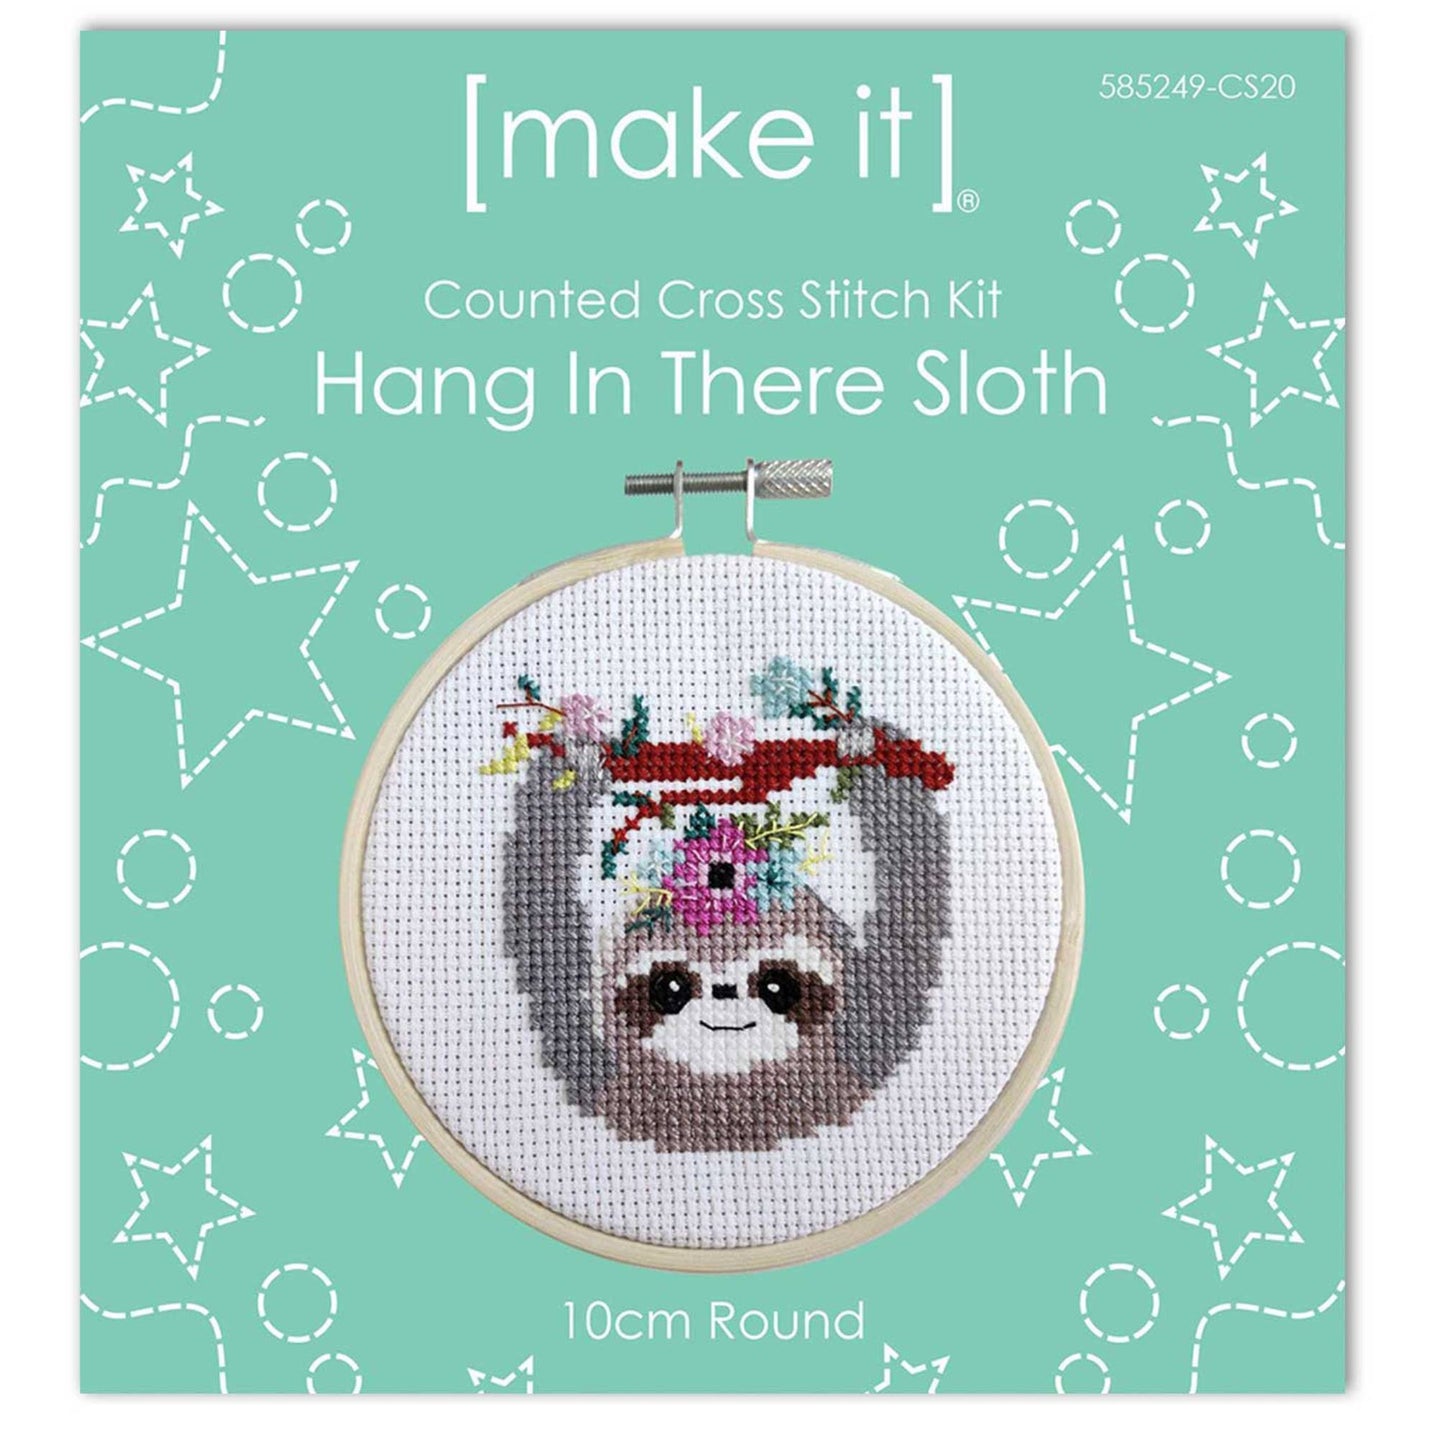 Counted Cross stitch Hang in There sloth with threads, hoop, 14 count Aida craft kit suit beginners